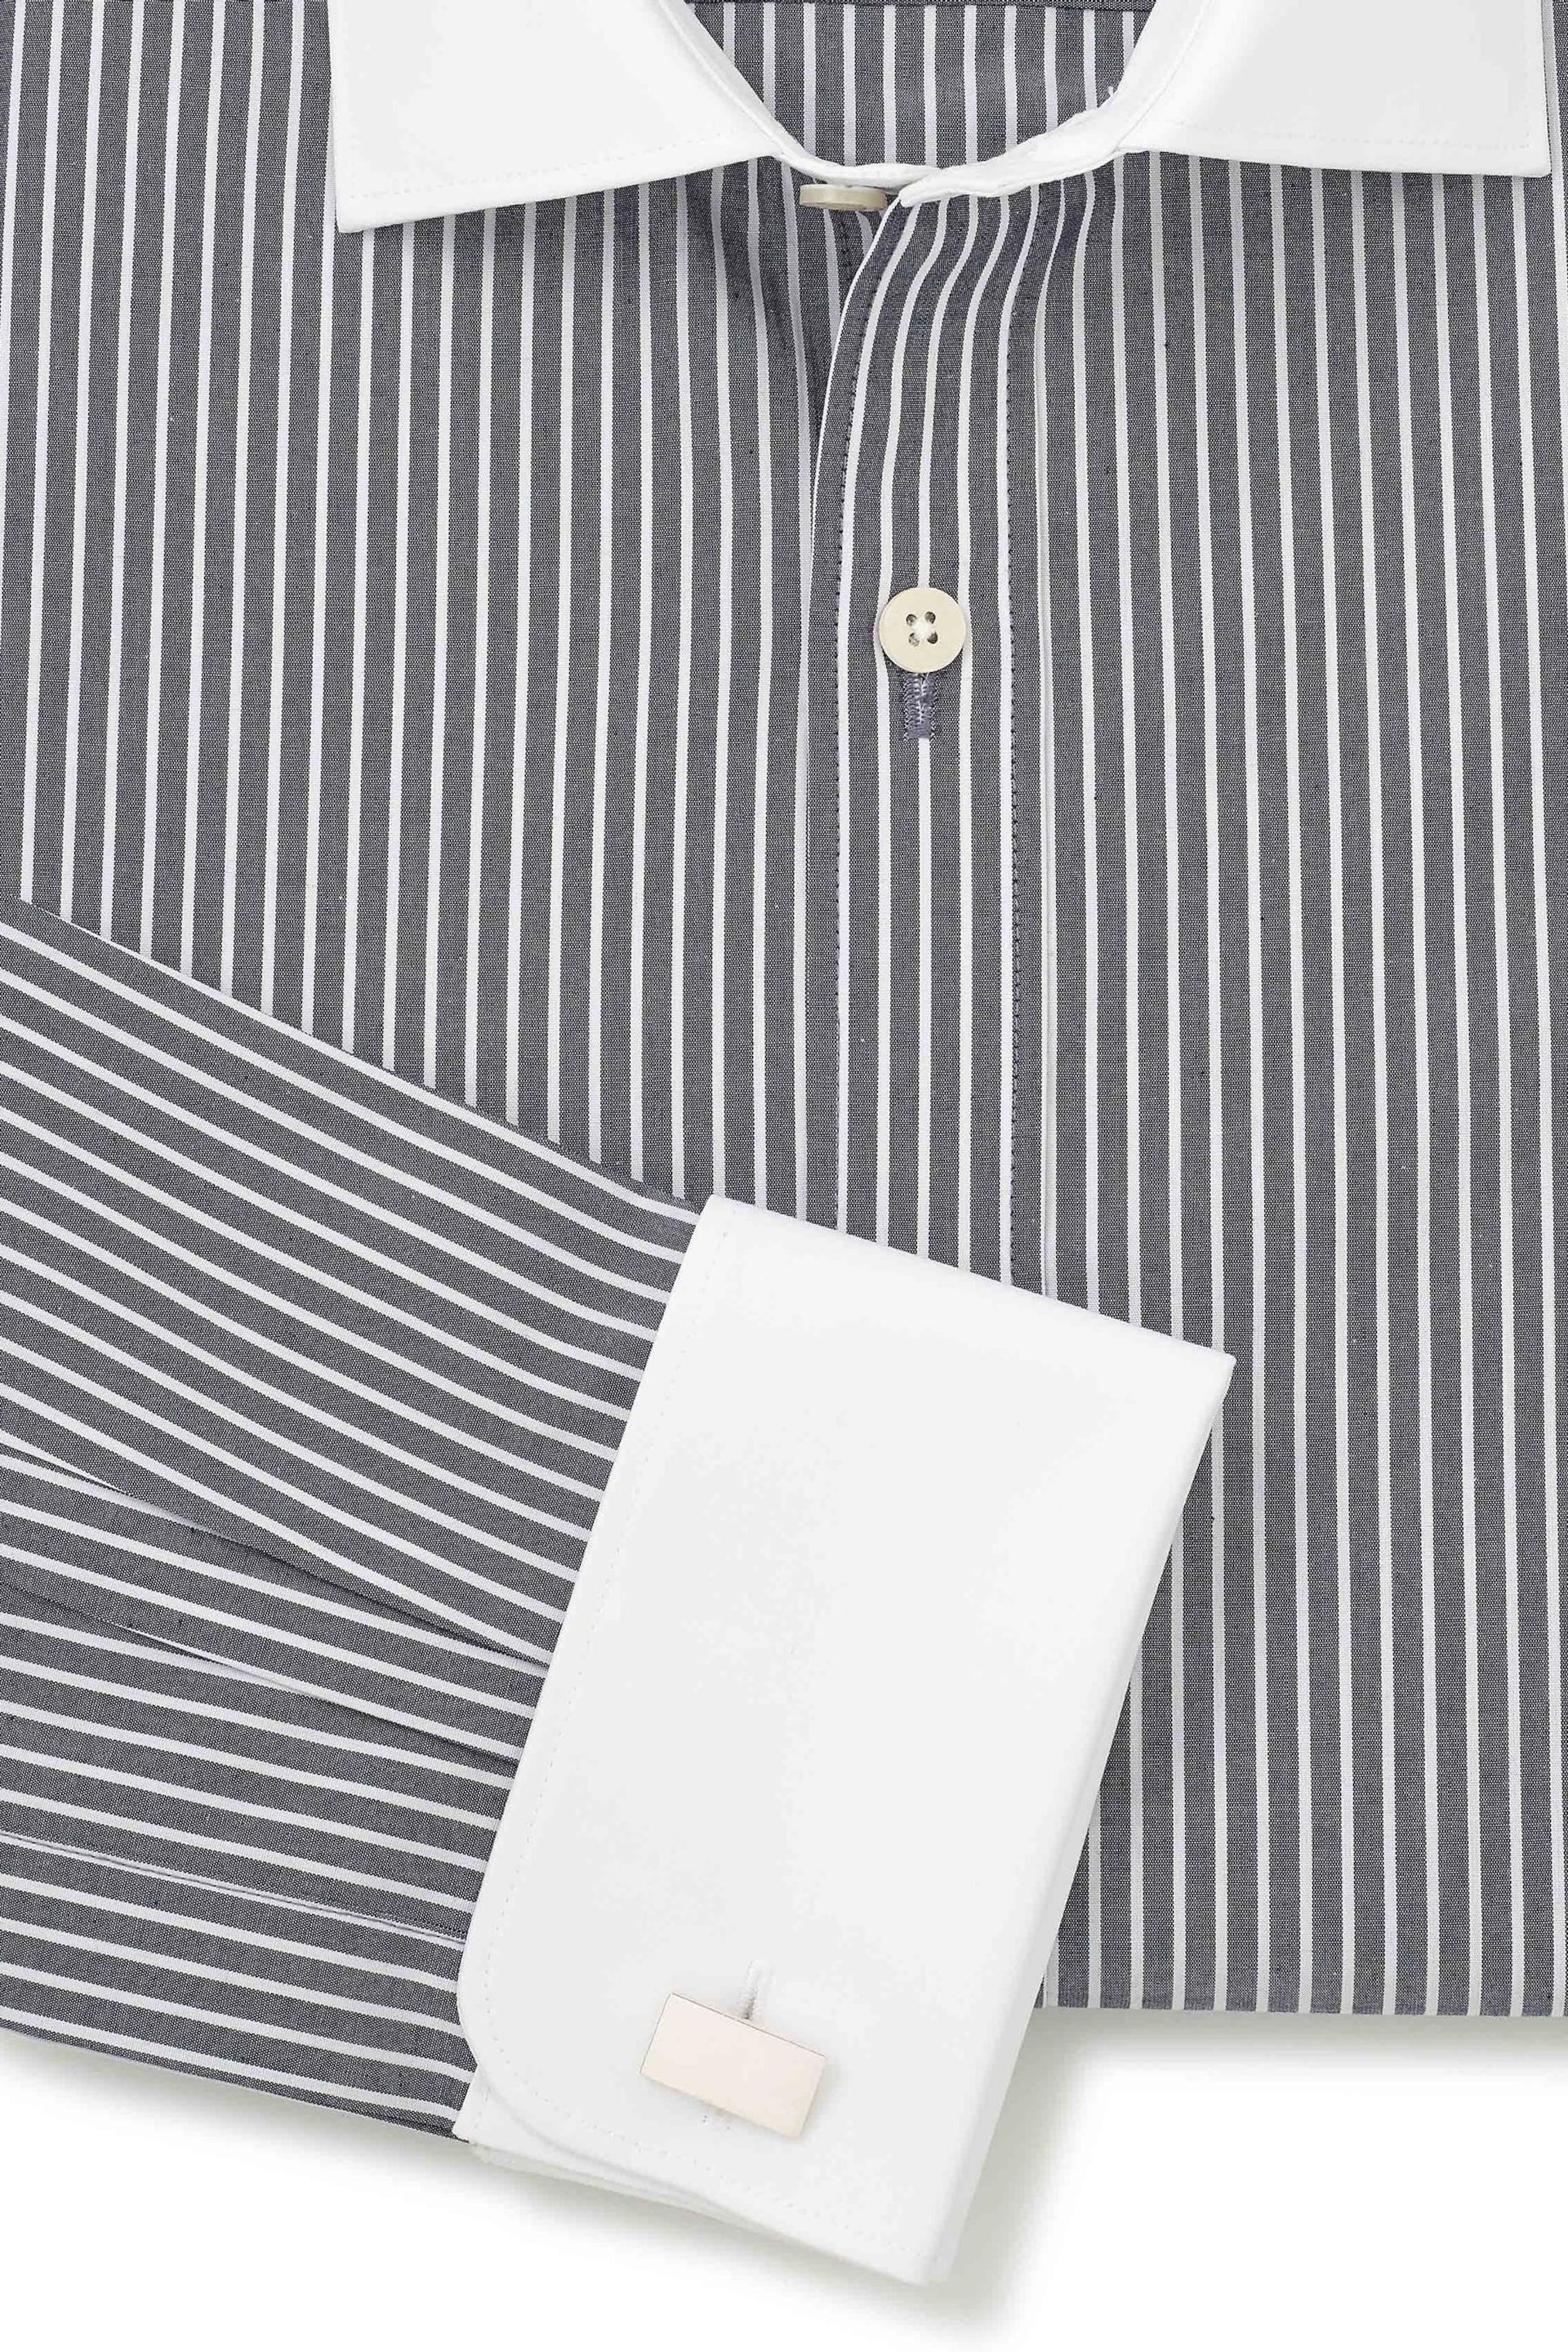 Savile Row Company Blue Stripe Winchester Double Cuff Formal Shirt - Image 6 of 7